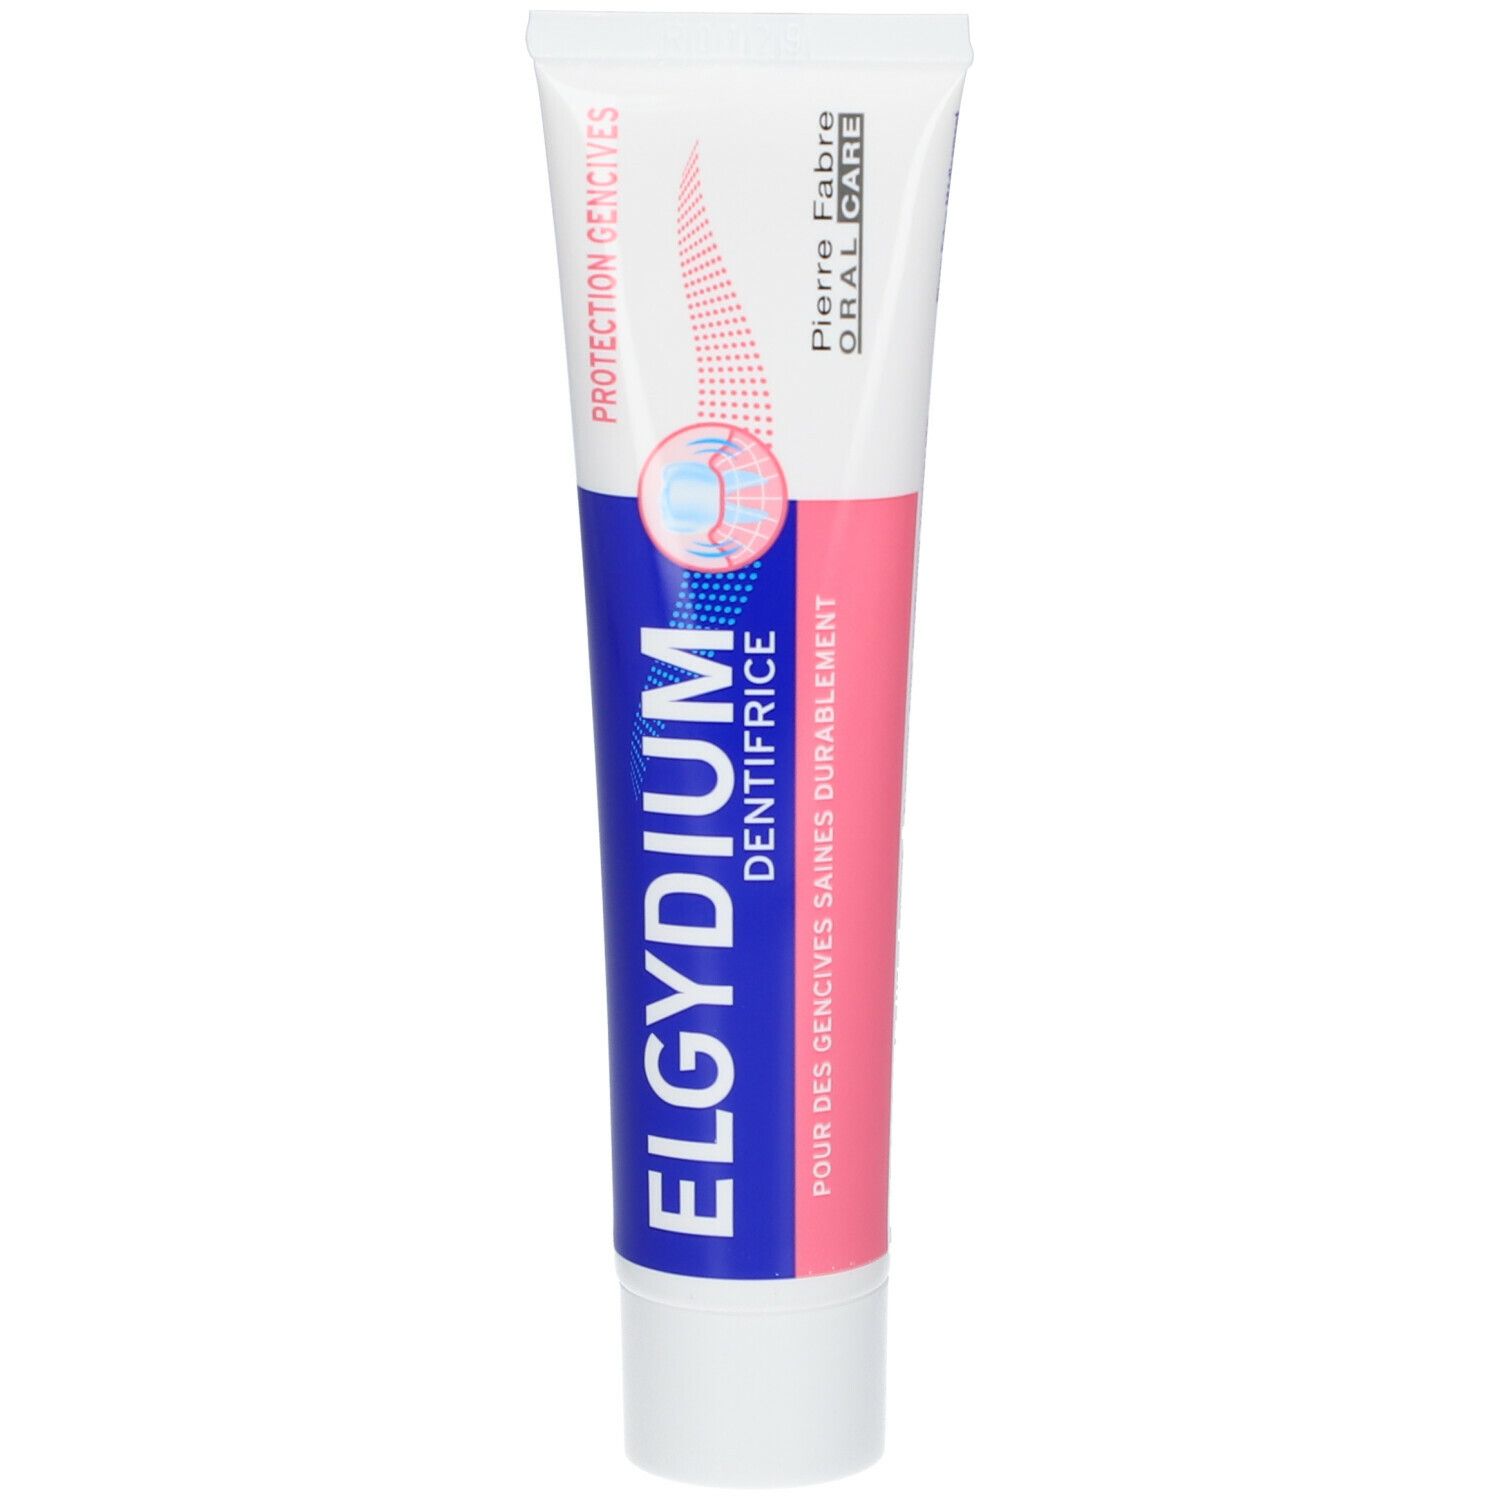 Elgydium Protection Gencives Dentifrice